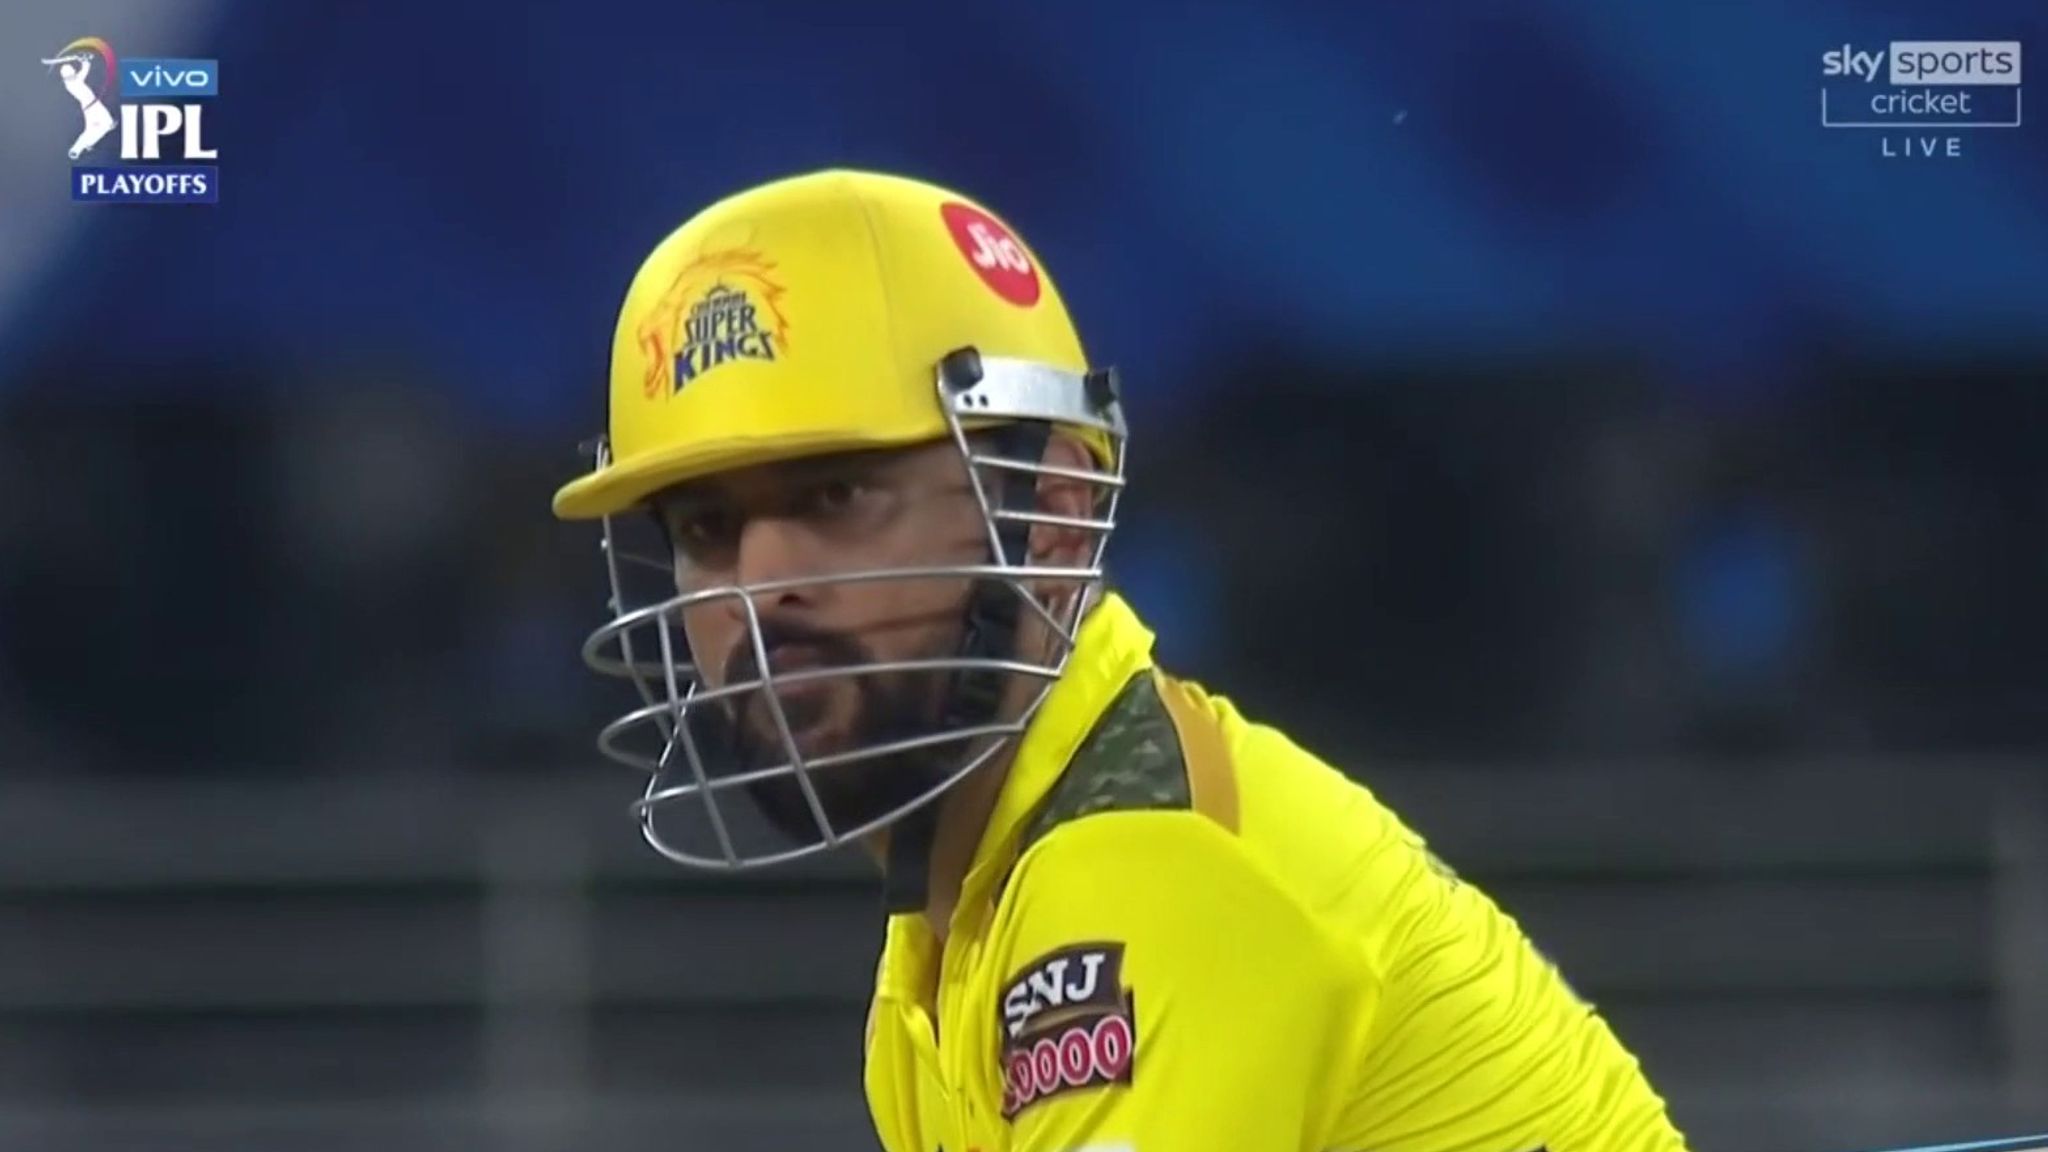 IPL MS Dhoni steers Chennai Super Kings into final with tense win over Delhi Capitals Cricket News Sky Sports